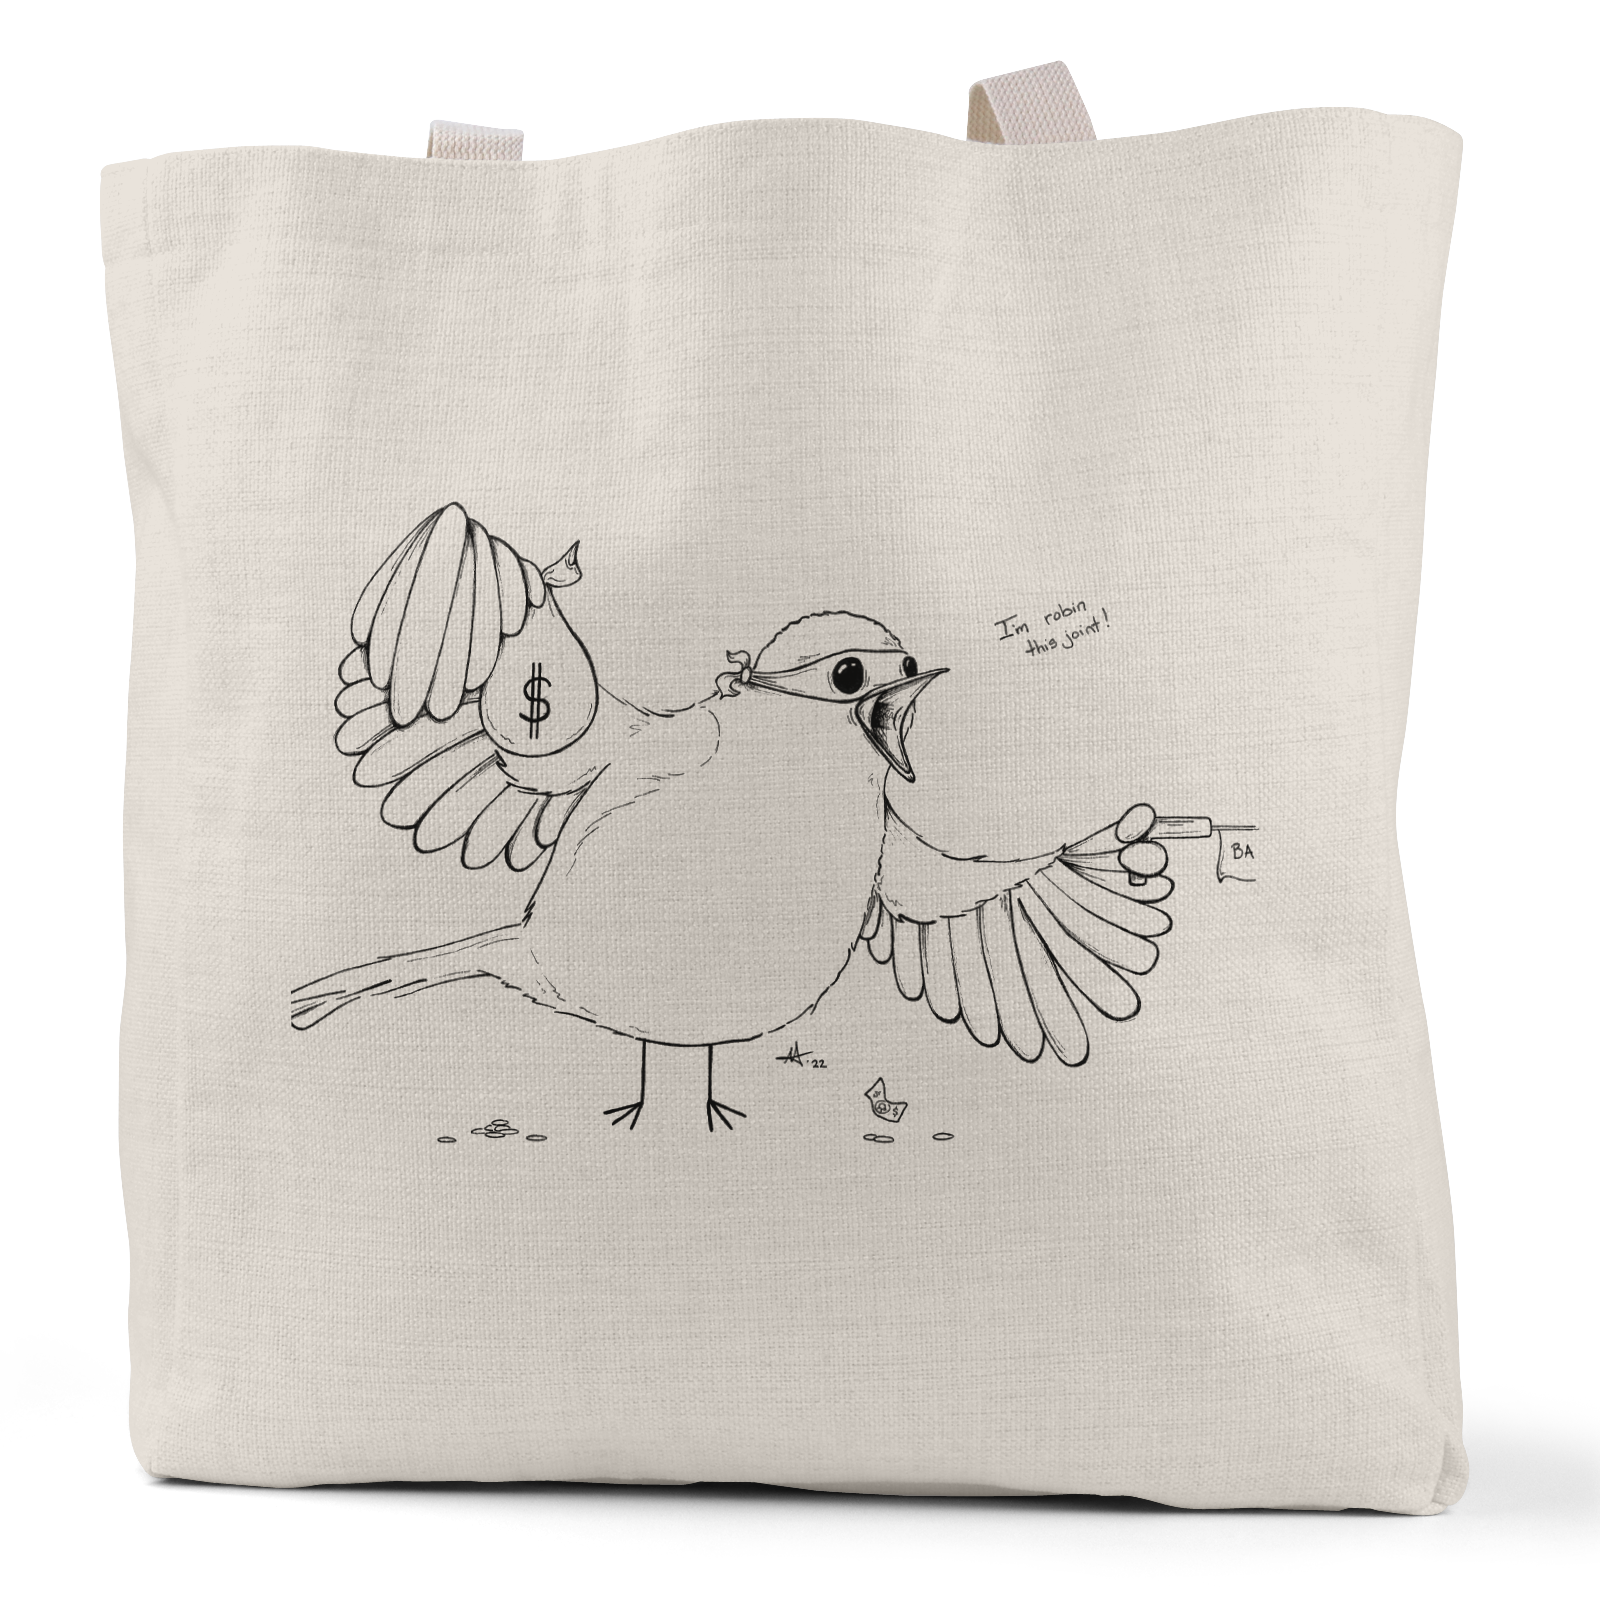 "I'm robin this joint!" - Large Linen Tote